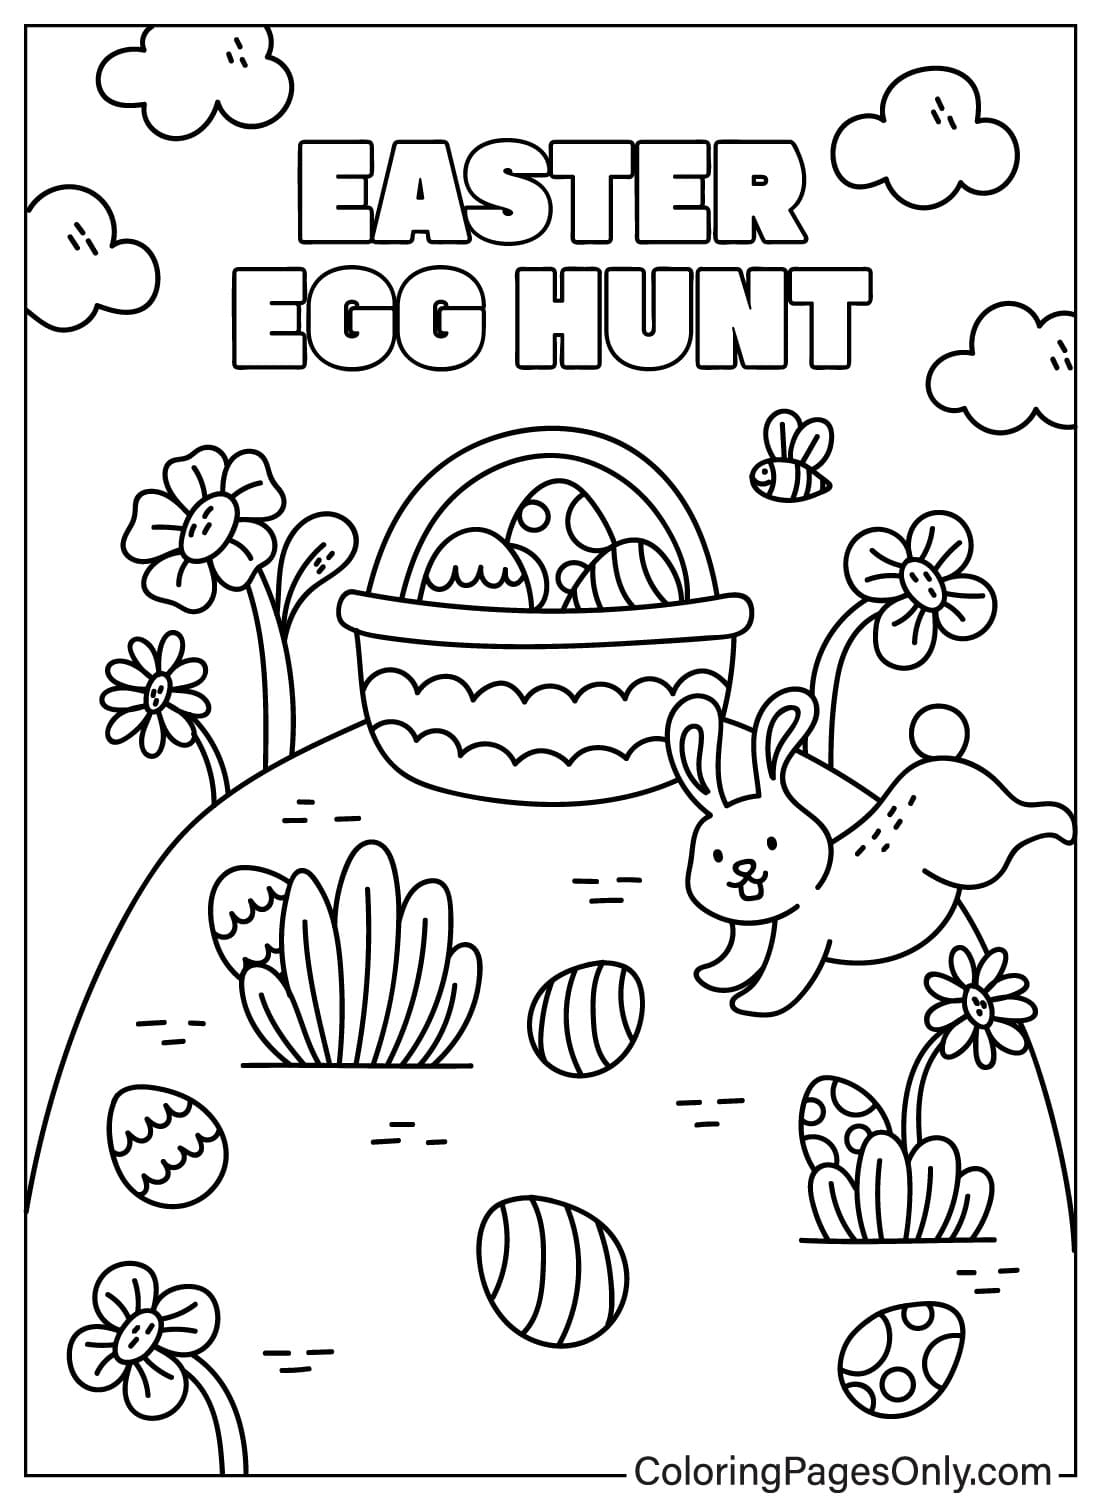 Easter Bunny Drawing Coloring Page